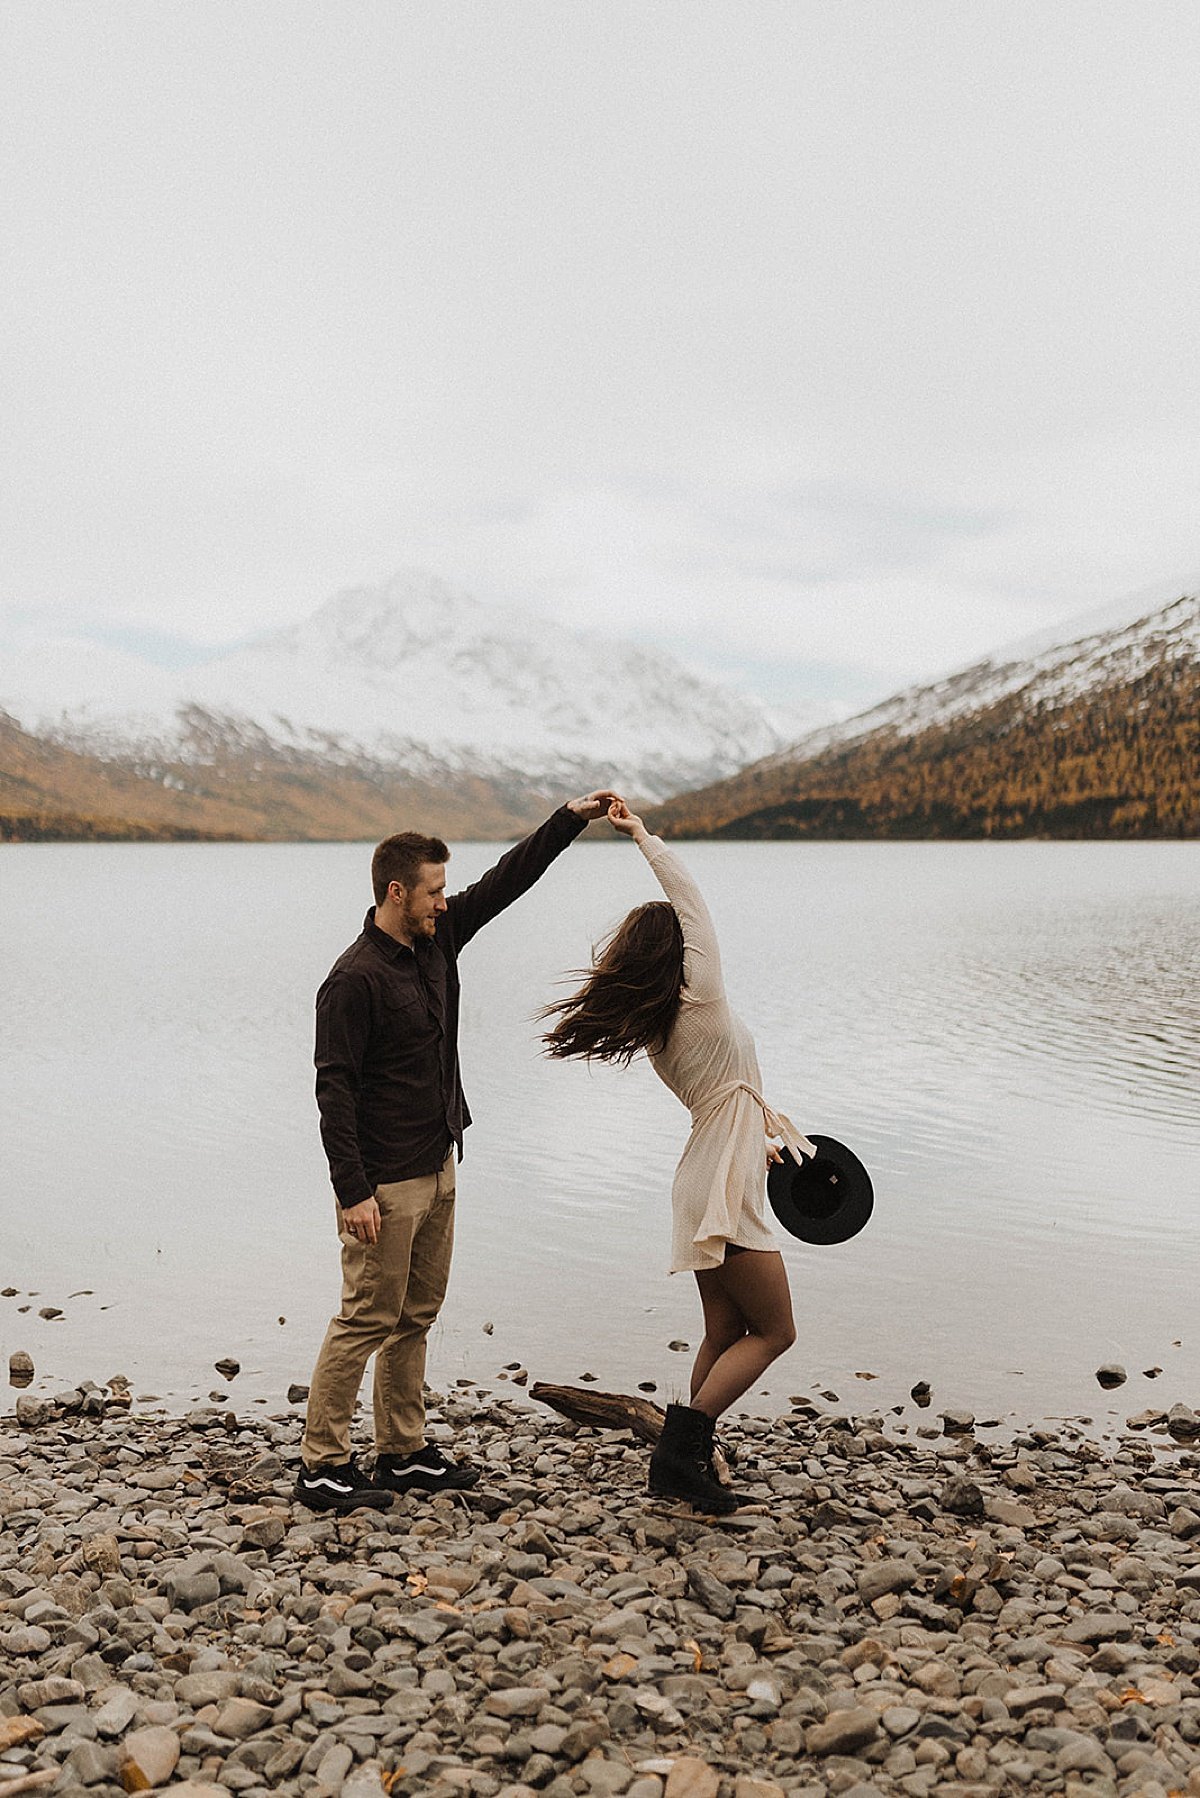  cute engaged couple dance and twirl on rocky beach at mountain lake shoot by theresa mcdonald photography 